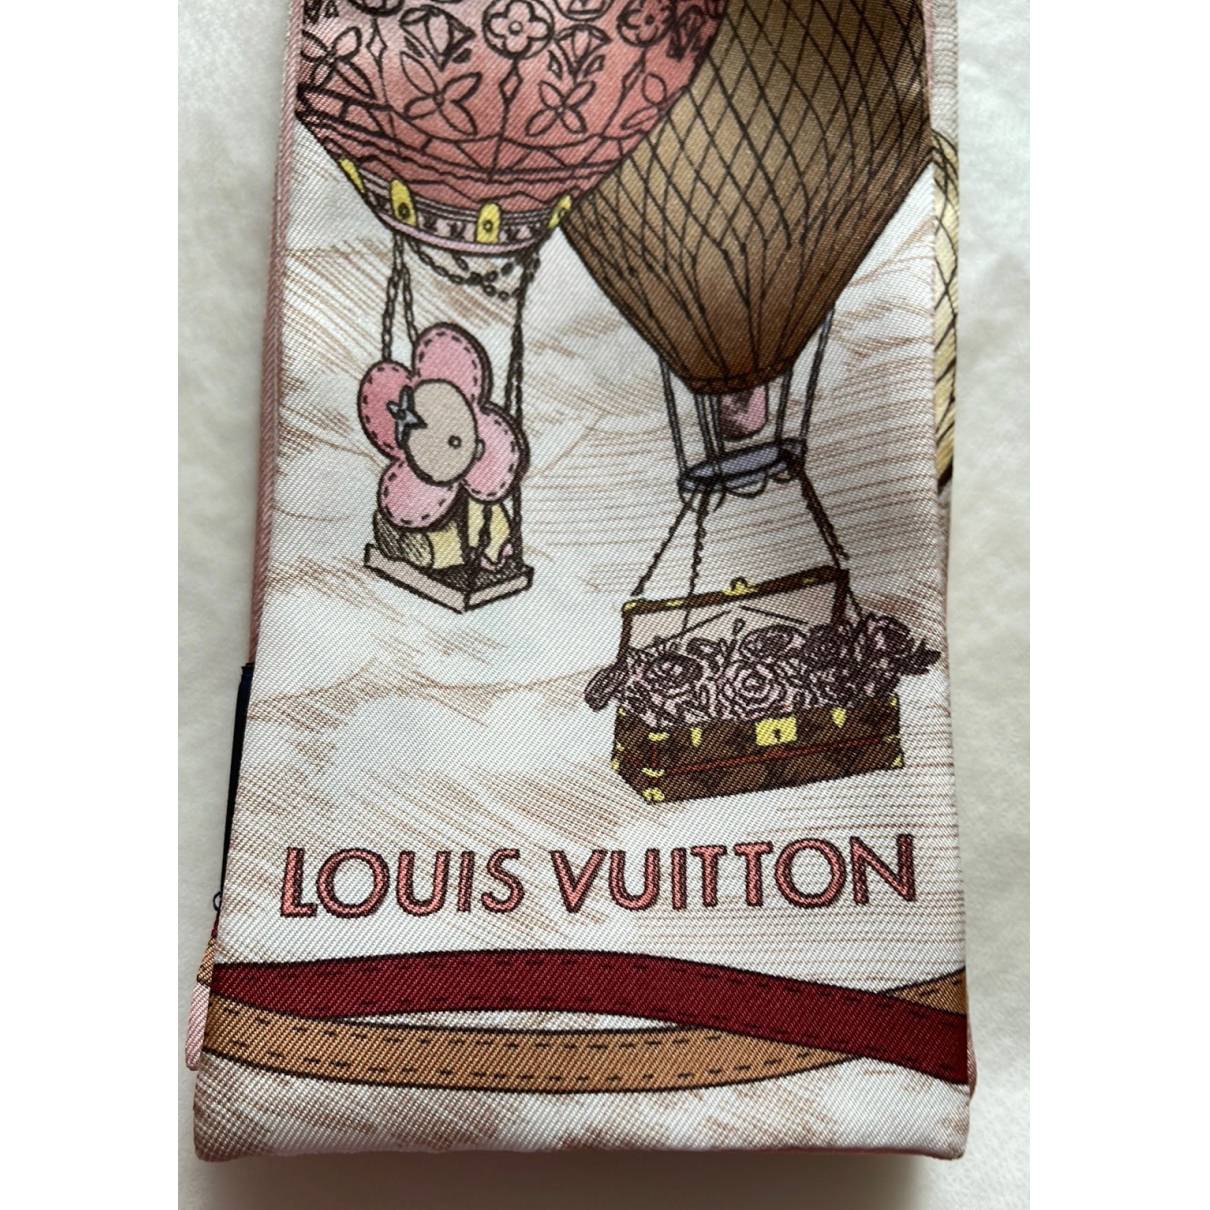 Louis Vuitton Monogram Rising Confidential Square 70 Silk Scarf - Pink  Scarves and Shawls, Accessories - LOU796313